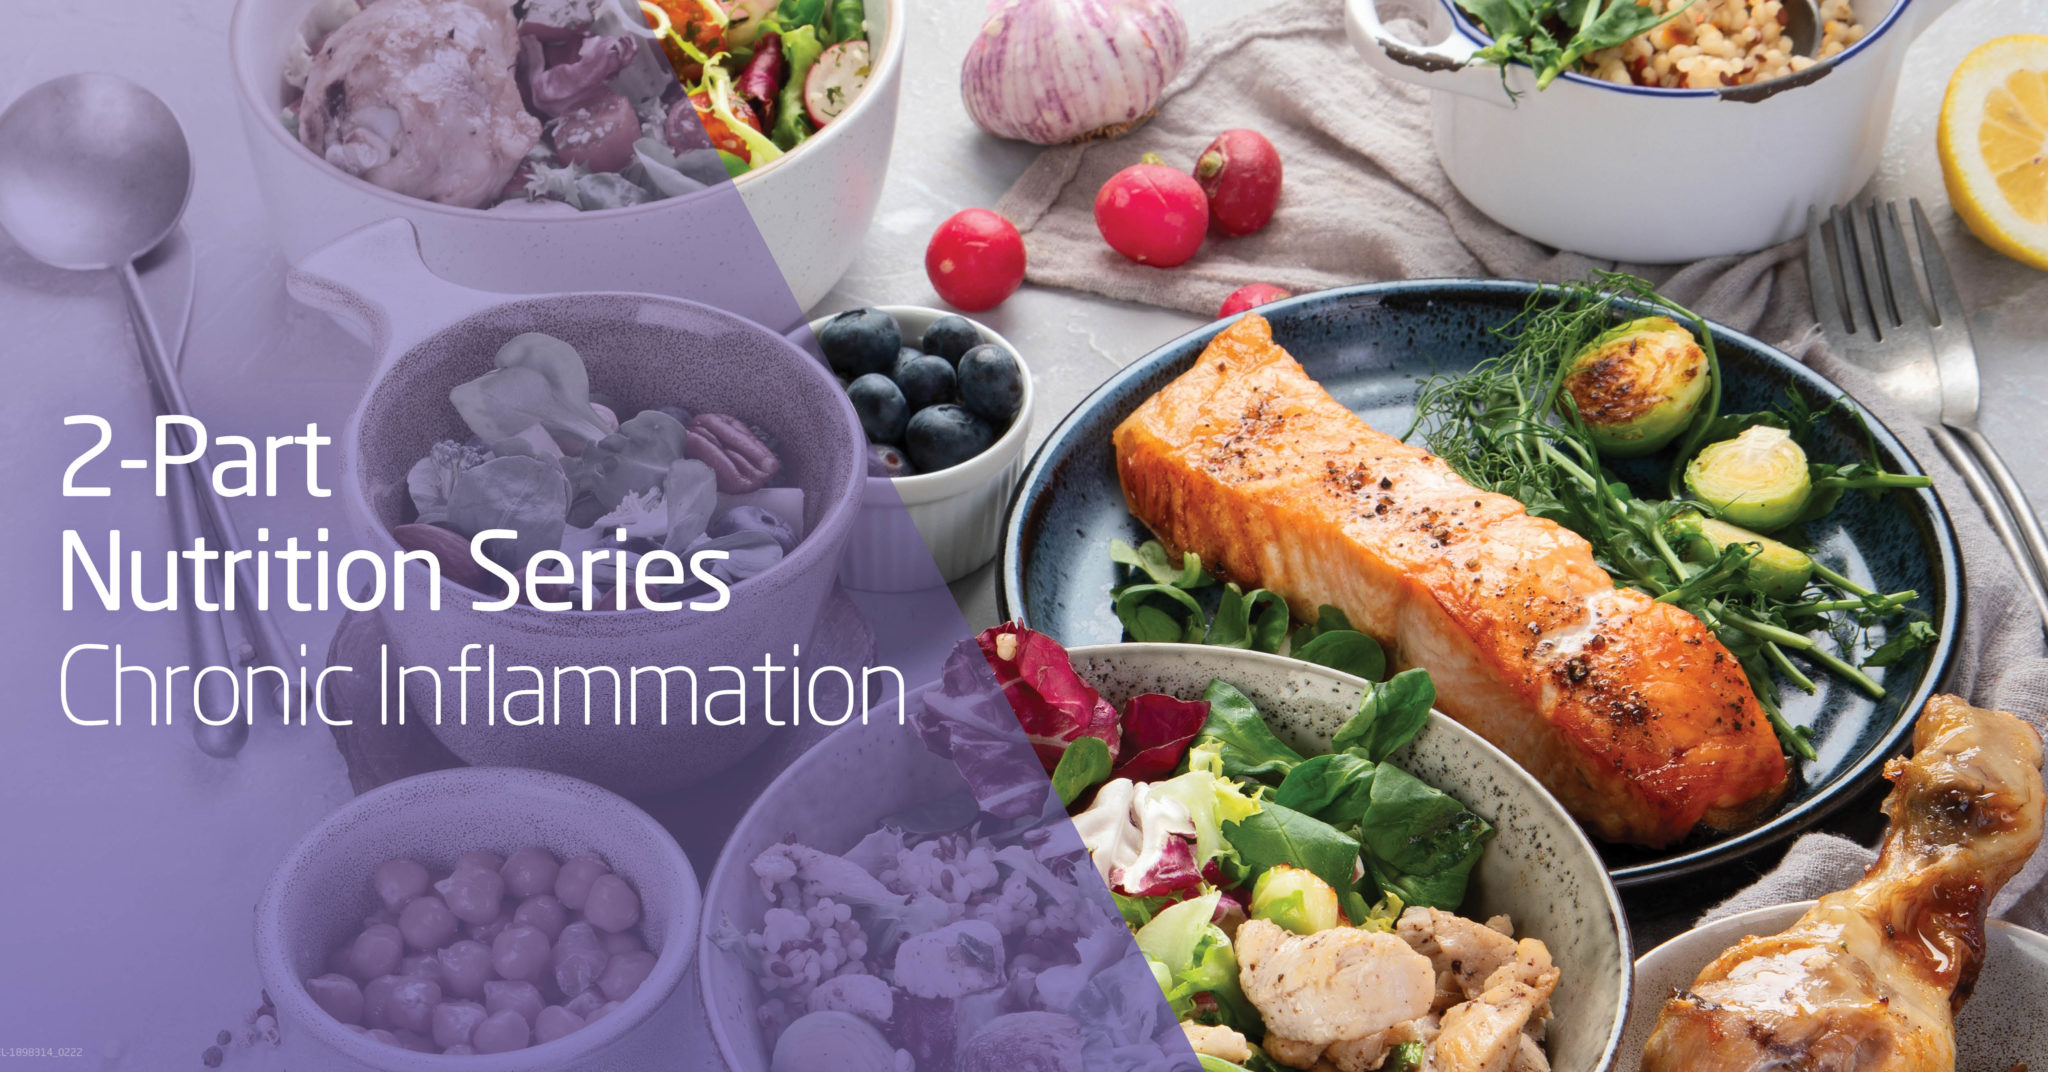 2-Part Nutrition Series Chronic Inflammation